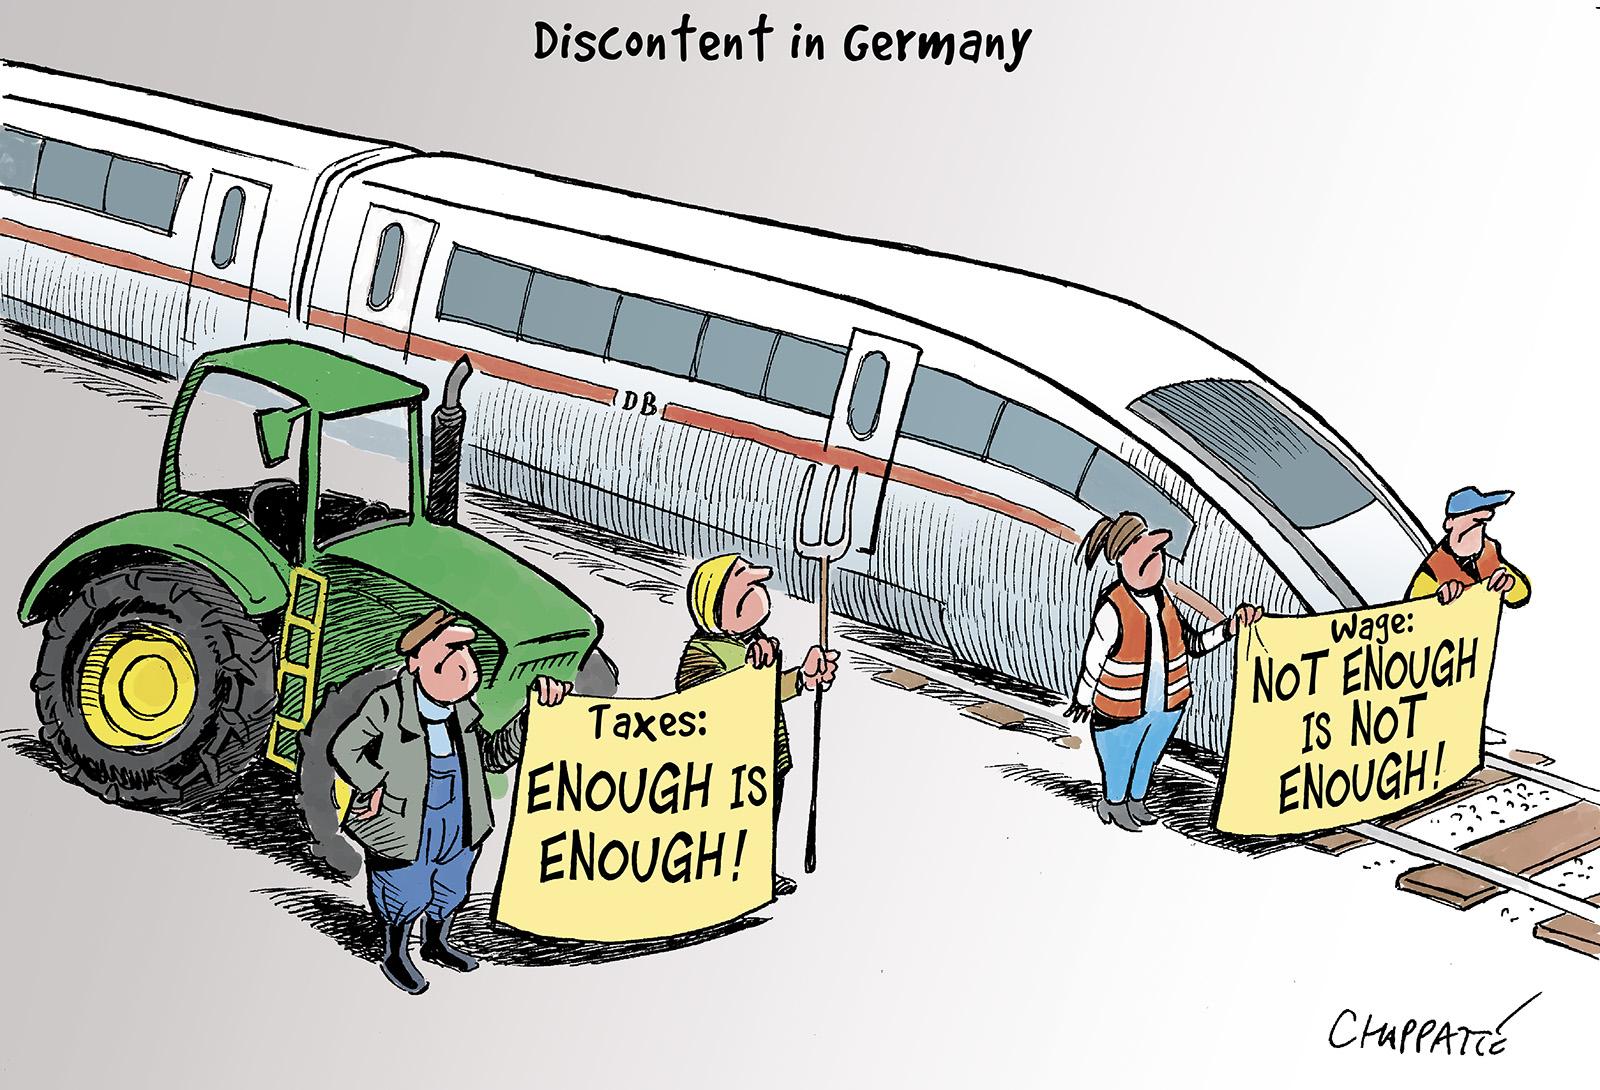 Discontent in Germany